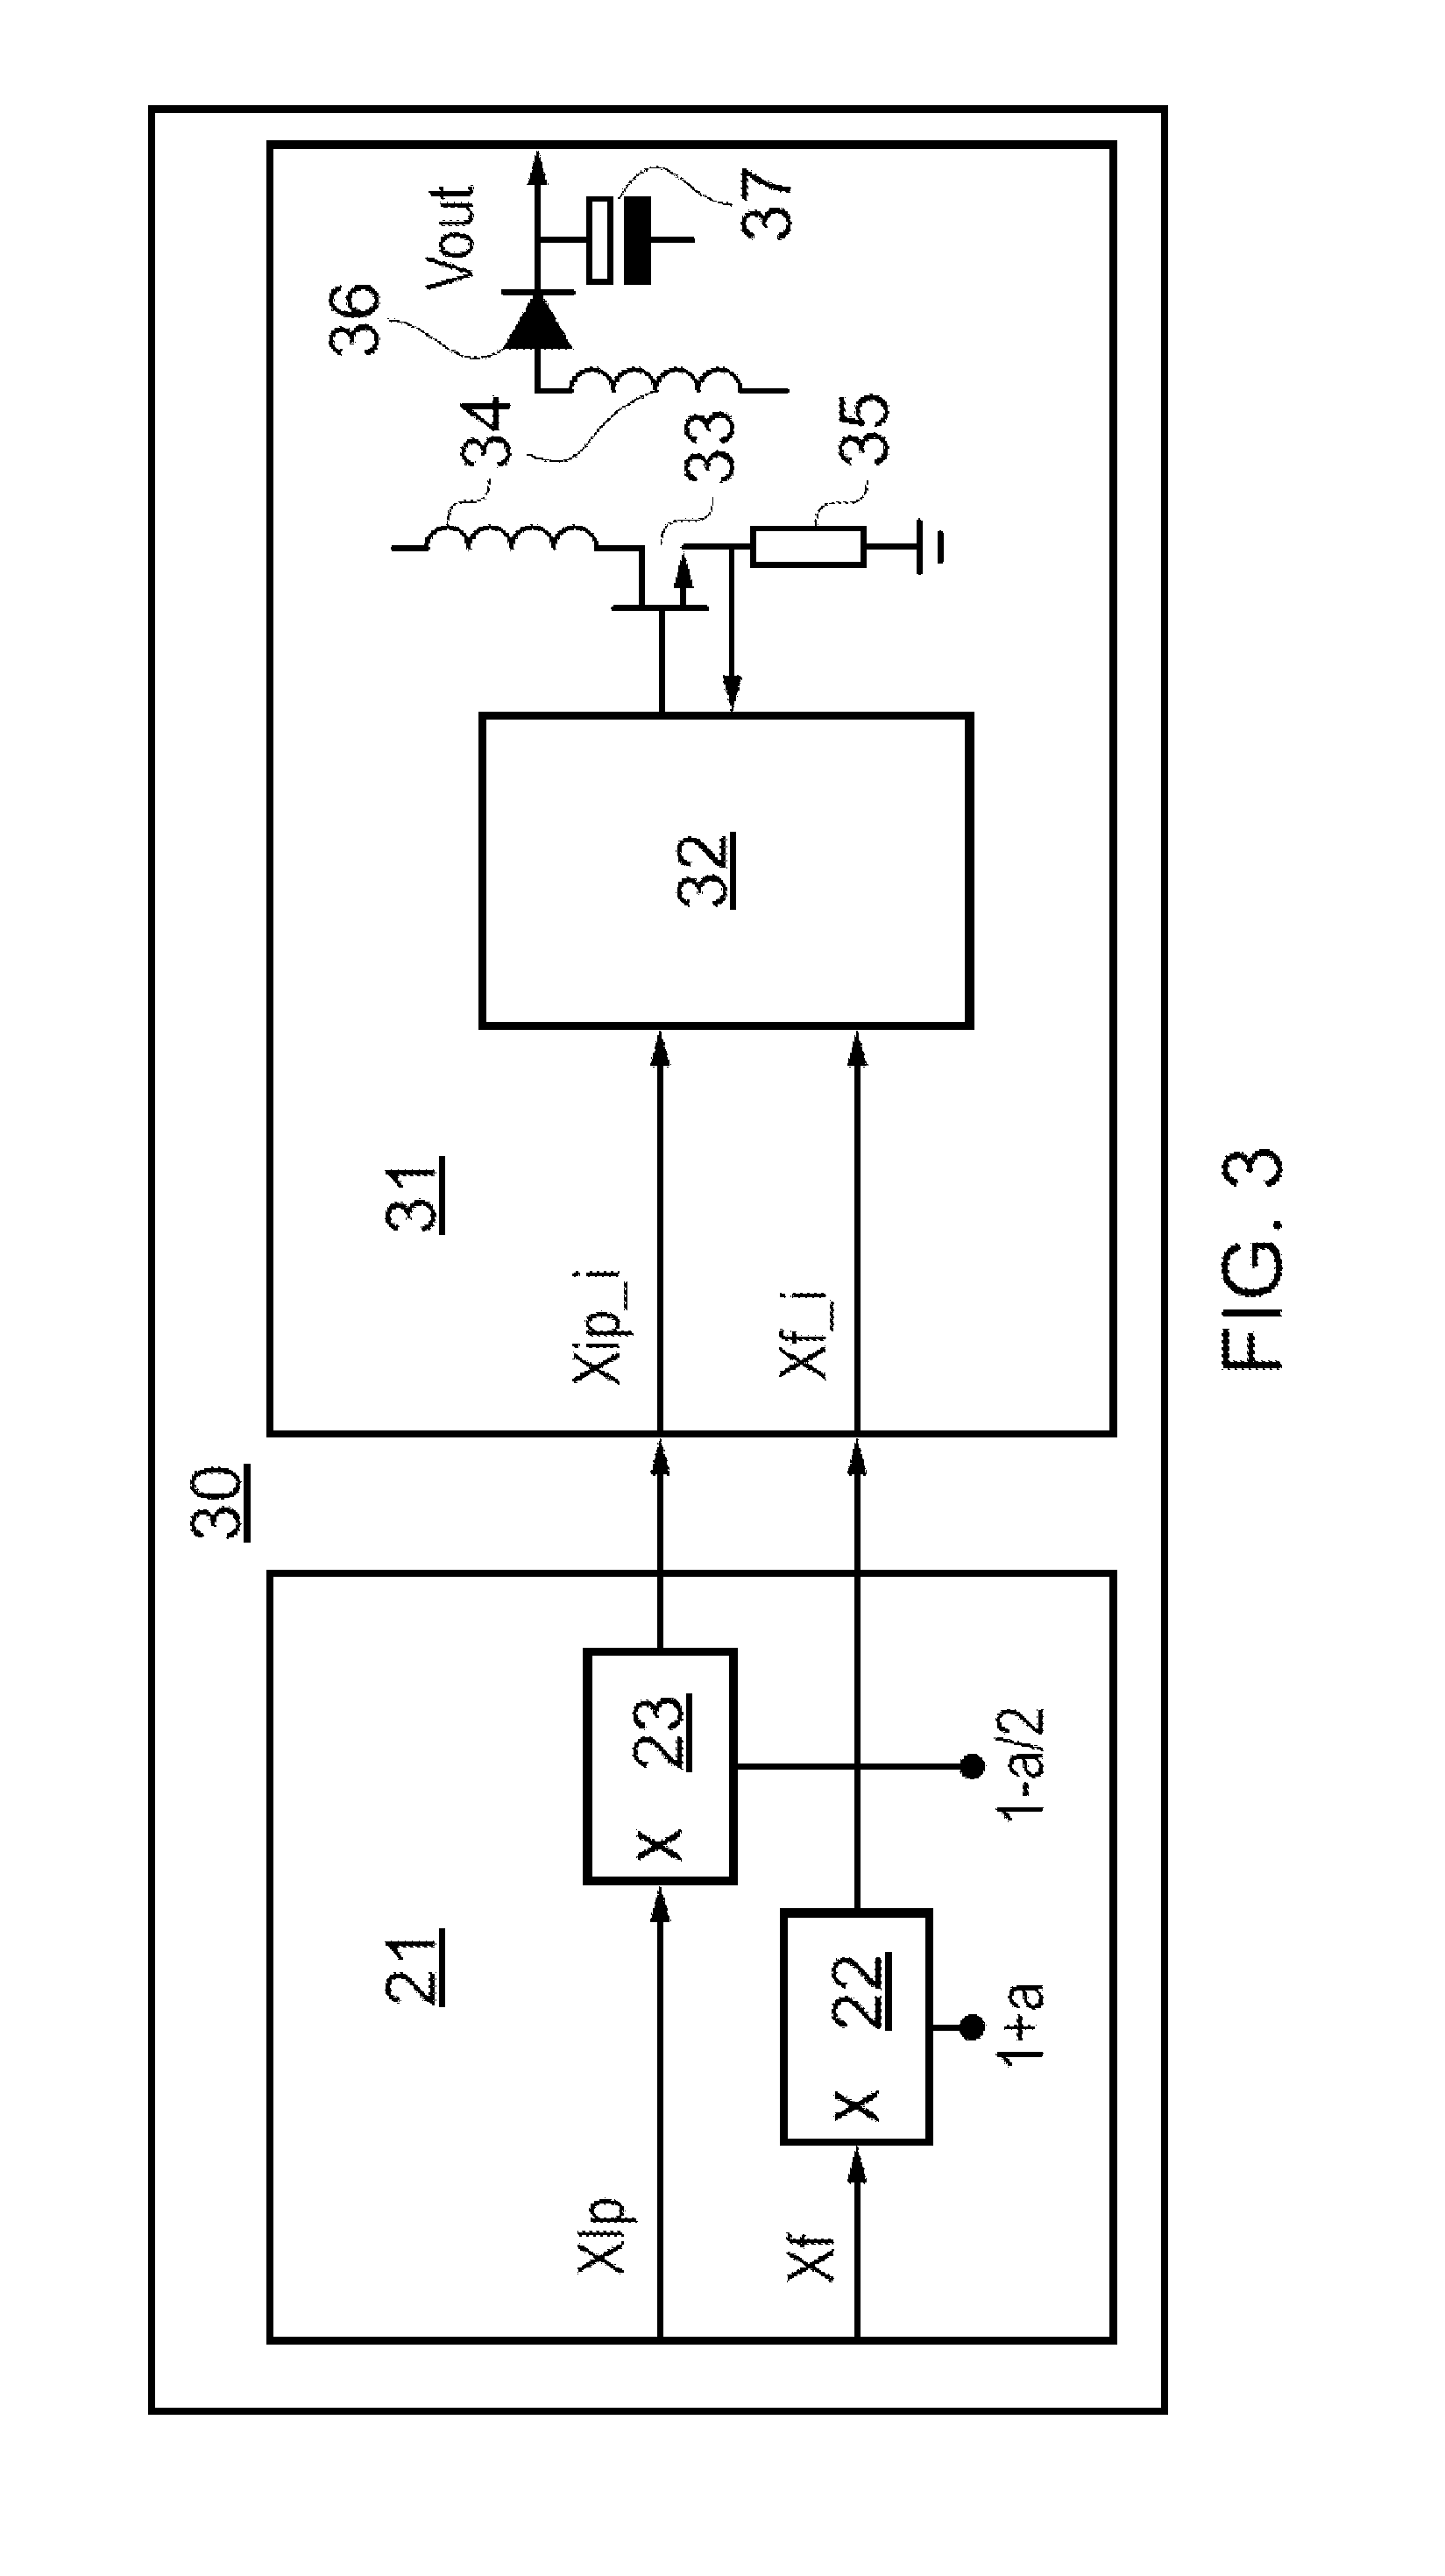 Method of controlling a switched mode power supply and controller therefor